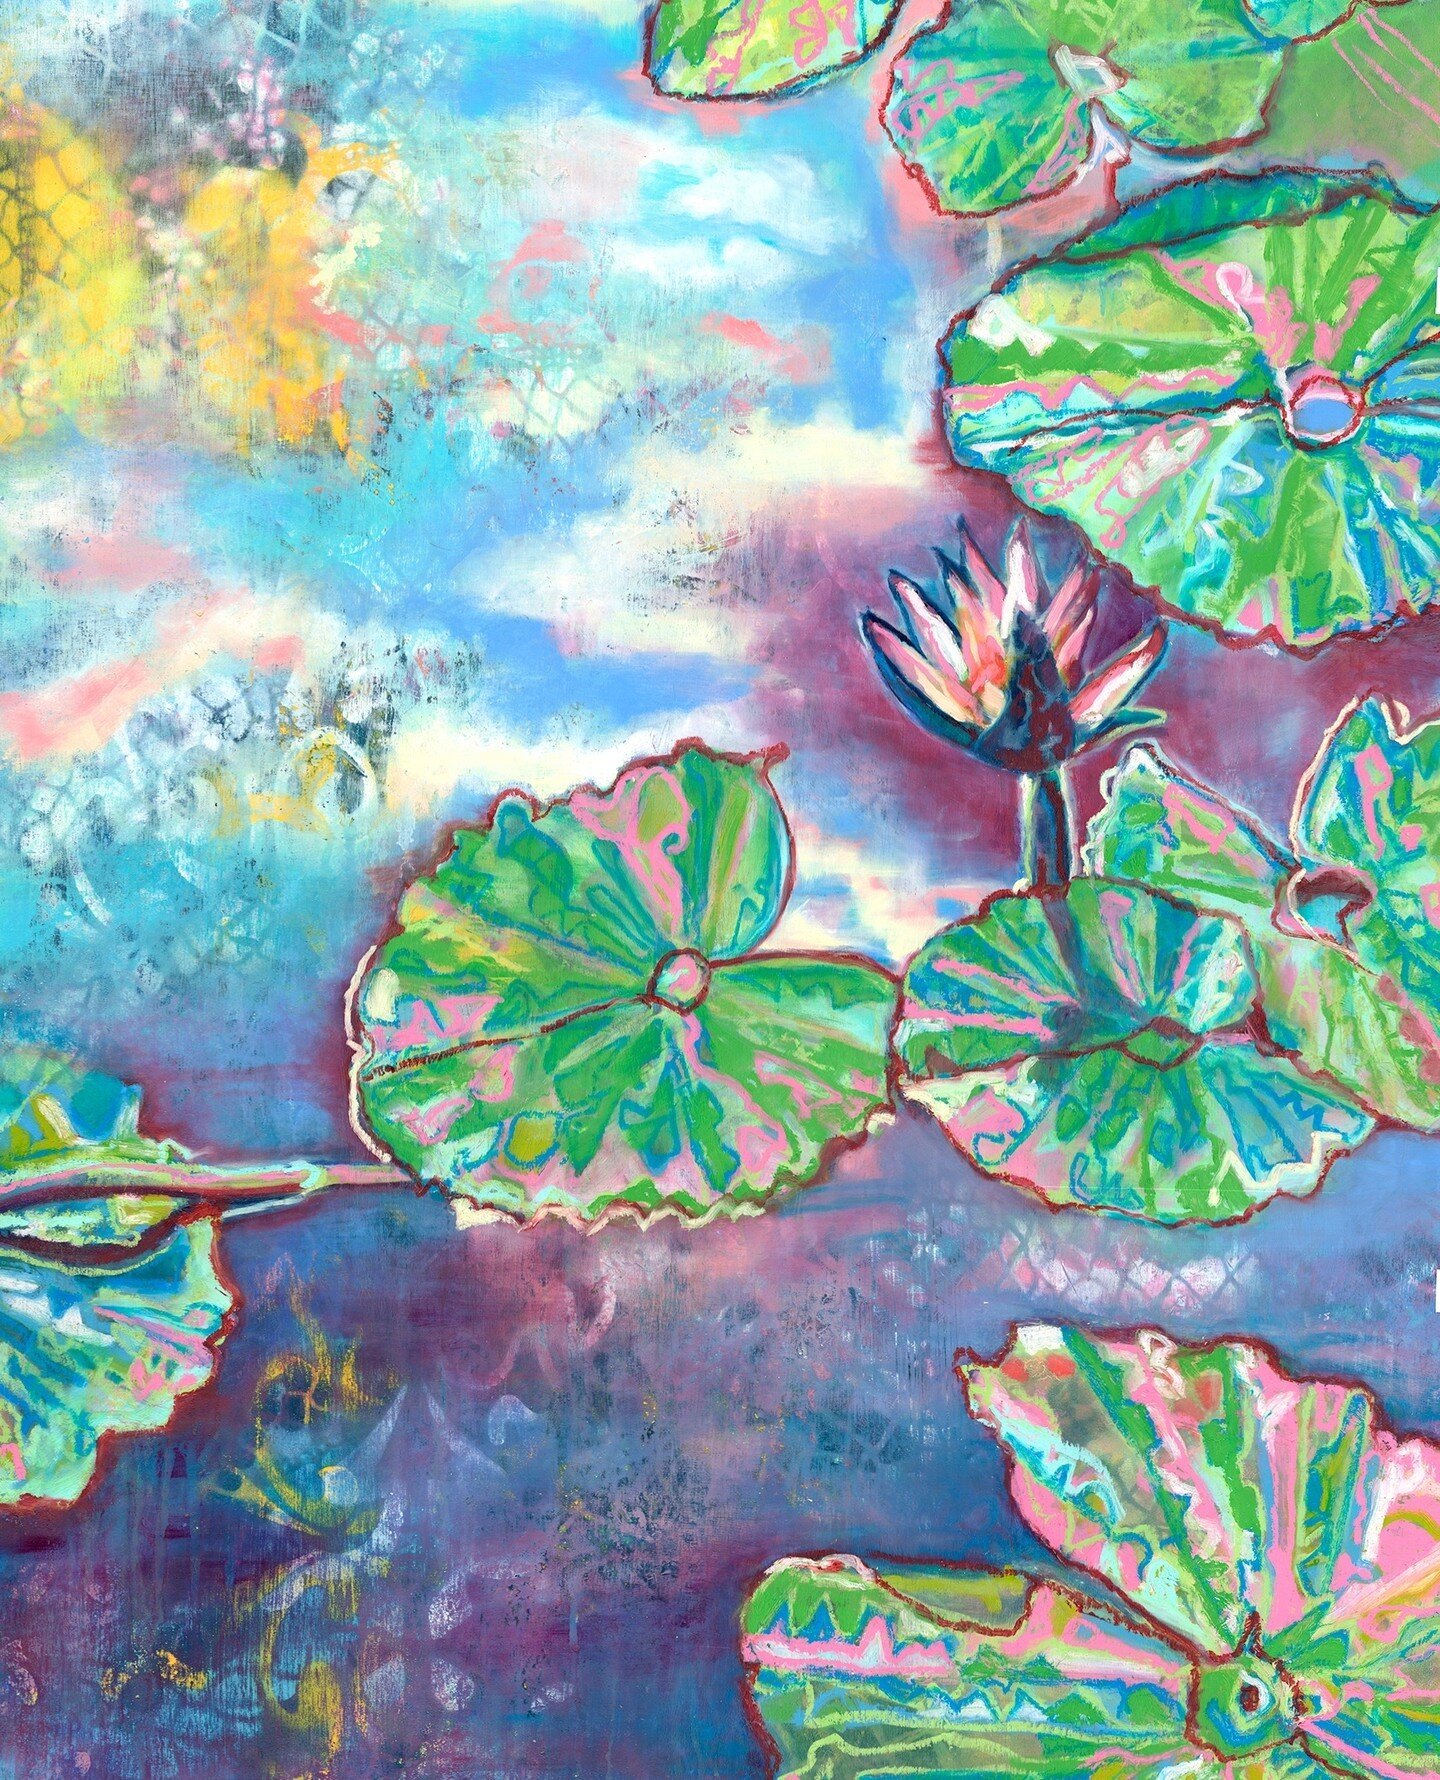 My love affair with lotus ponds continues...⁠
⁠
Lotus Pond No.3, 40x30&quot; enamel, oil on panel⁠
⁠
#availableartwork #largeoils #NYCartist #lotus #lotuspond⁠